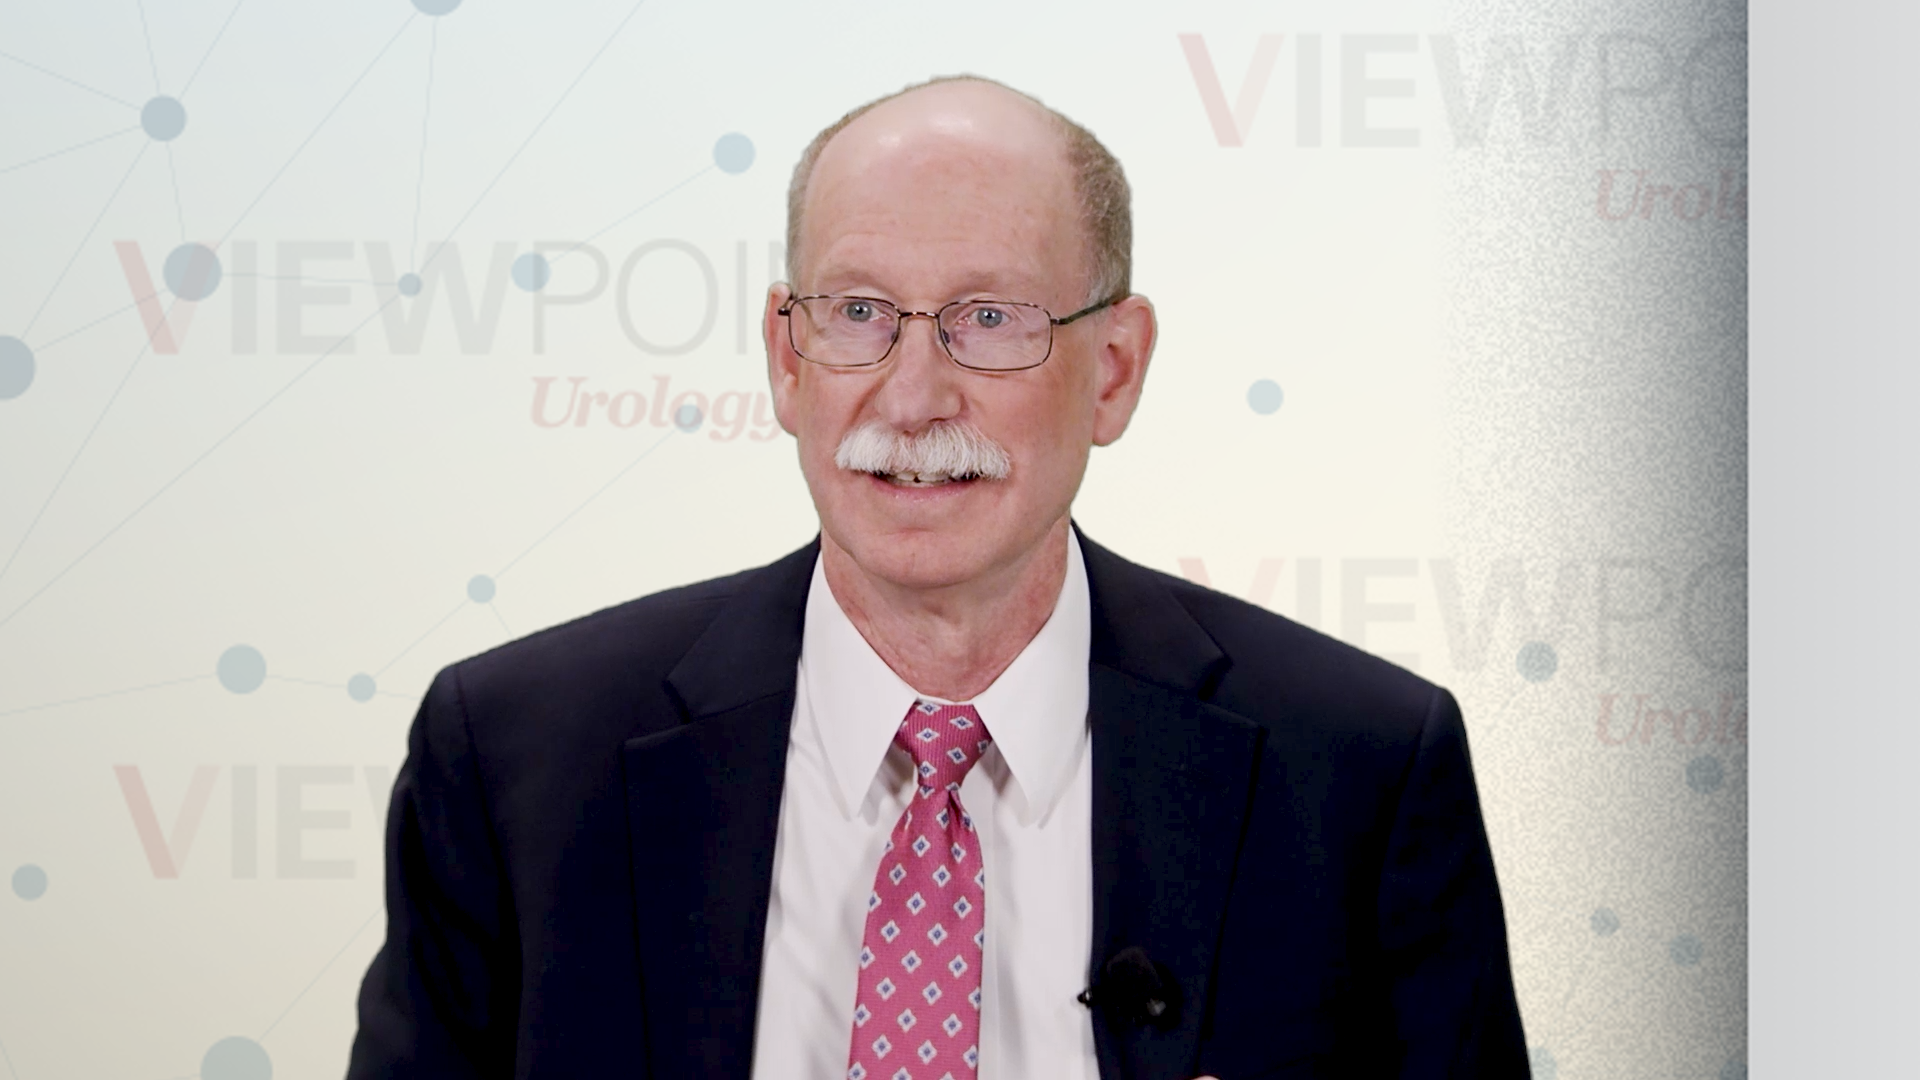 Overview of Available Clinical Guidelines on PSMA-PET Imaging in Prostate Cancer